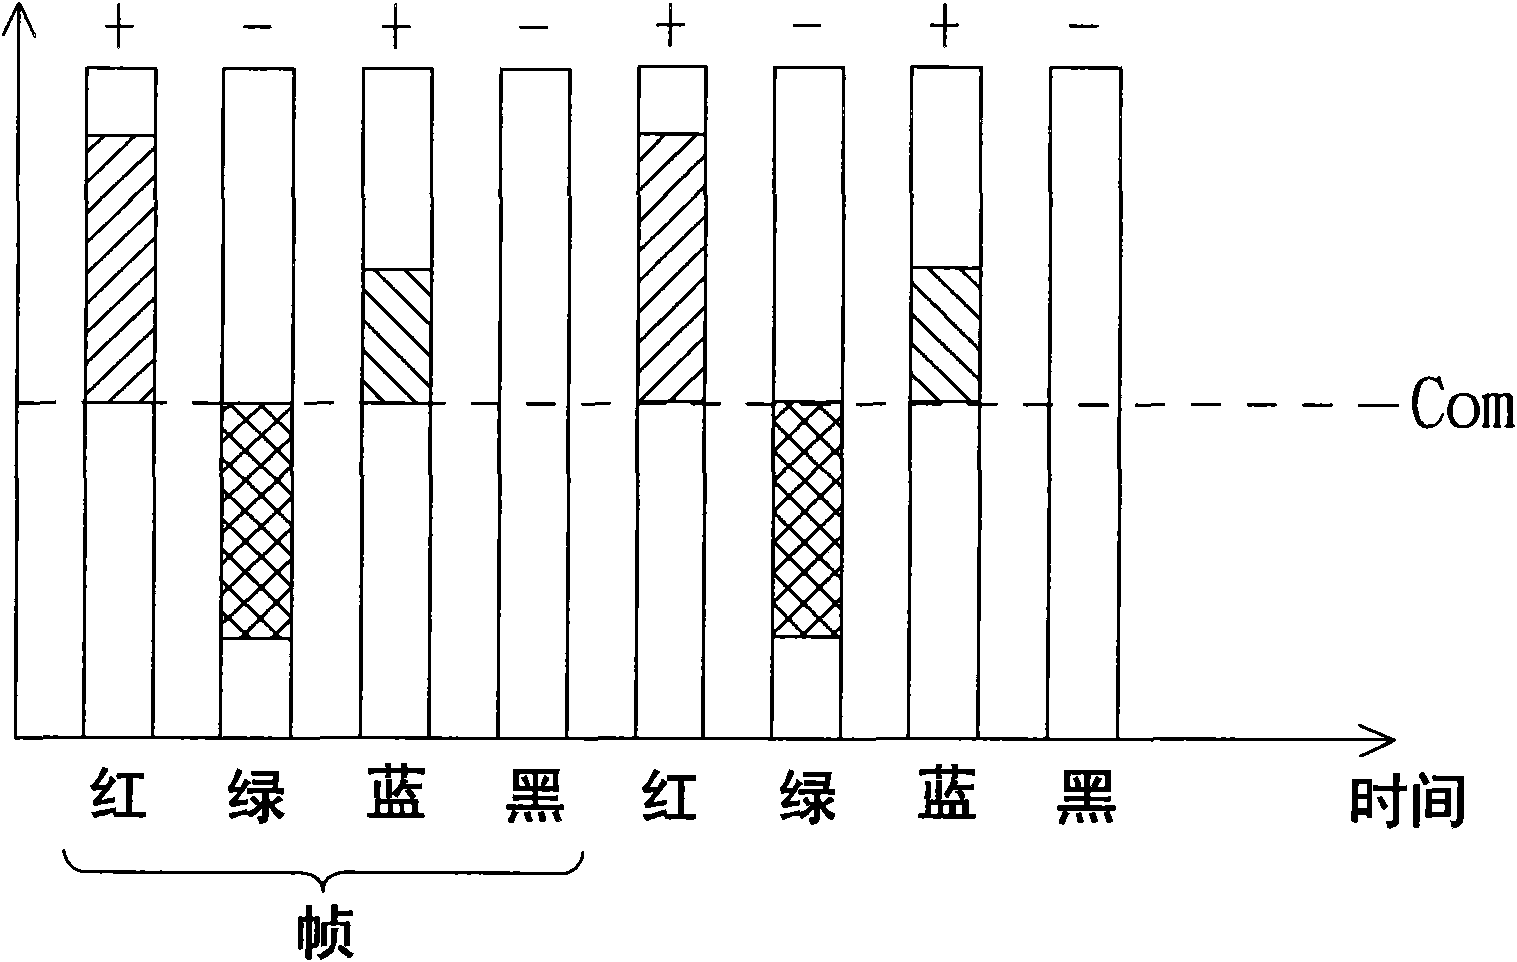 Flat panel color display and drive method of color pictures thereof